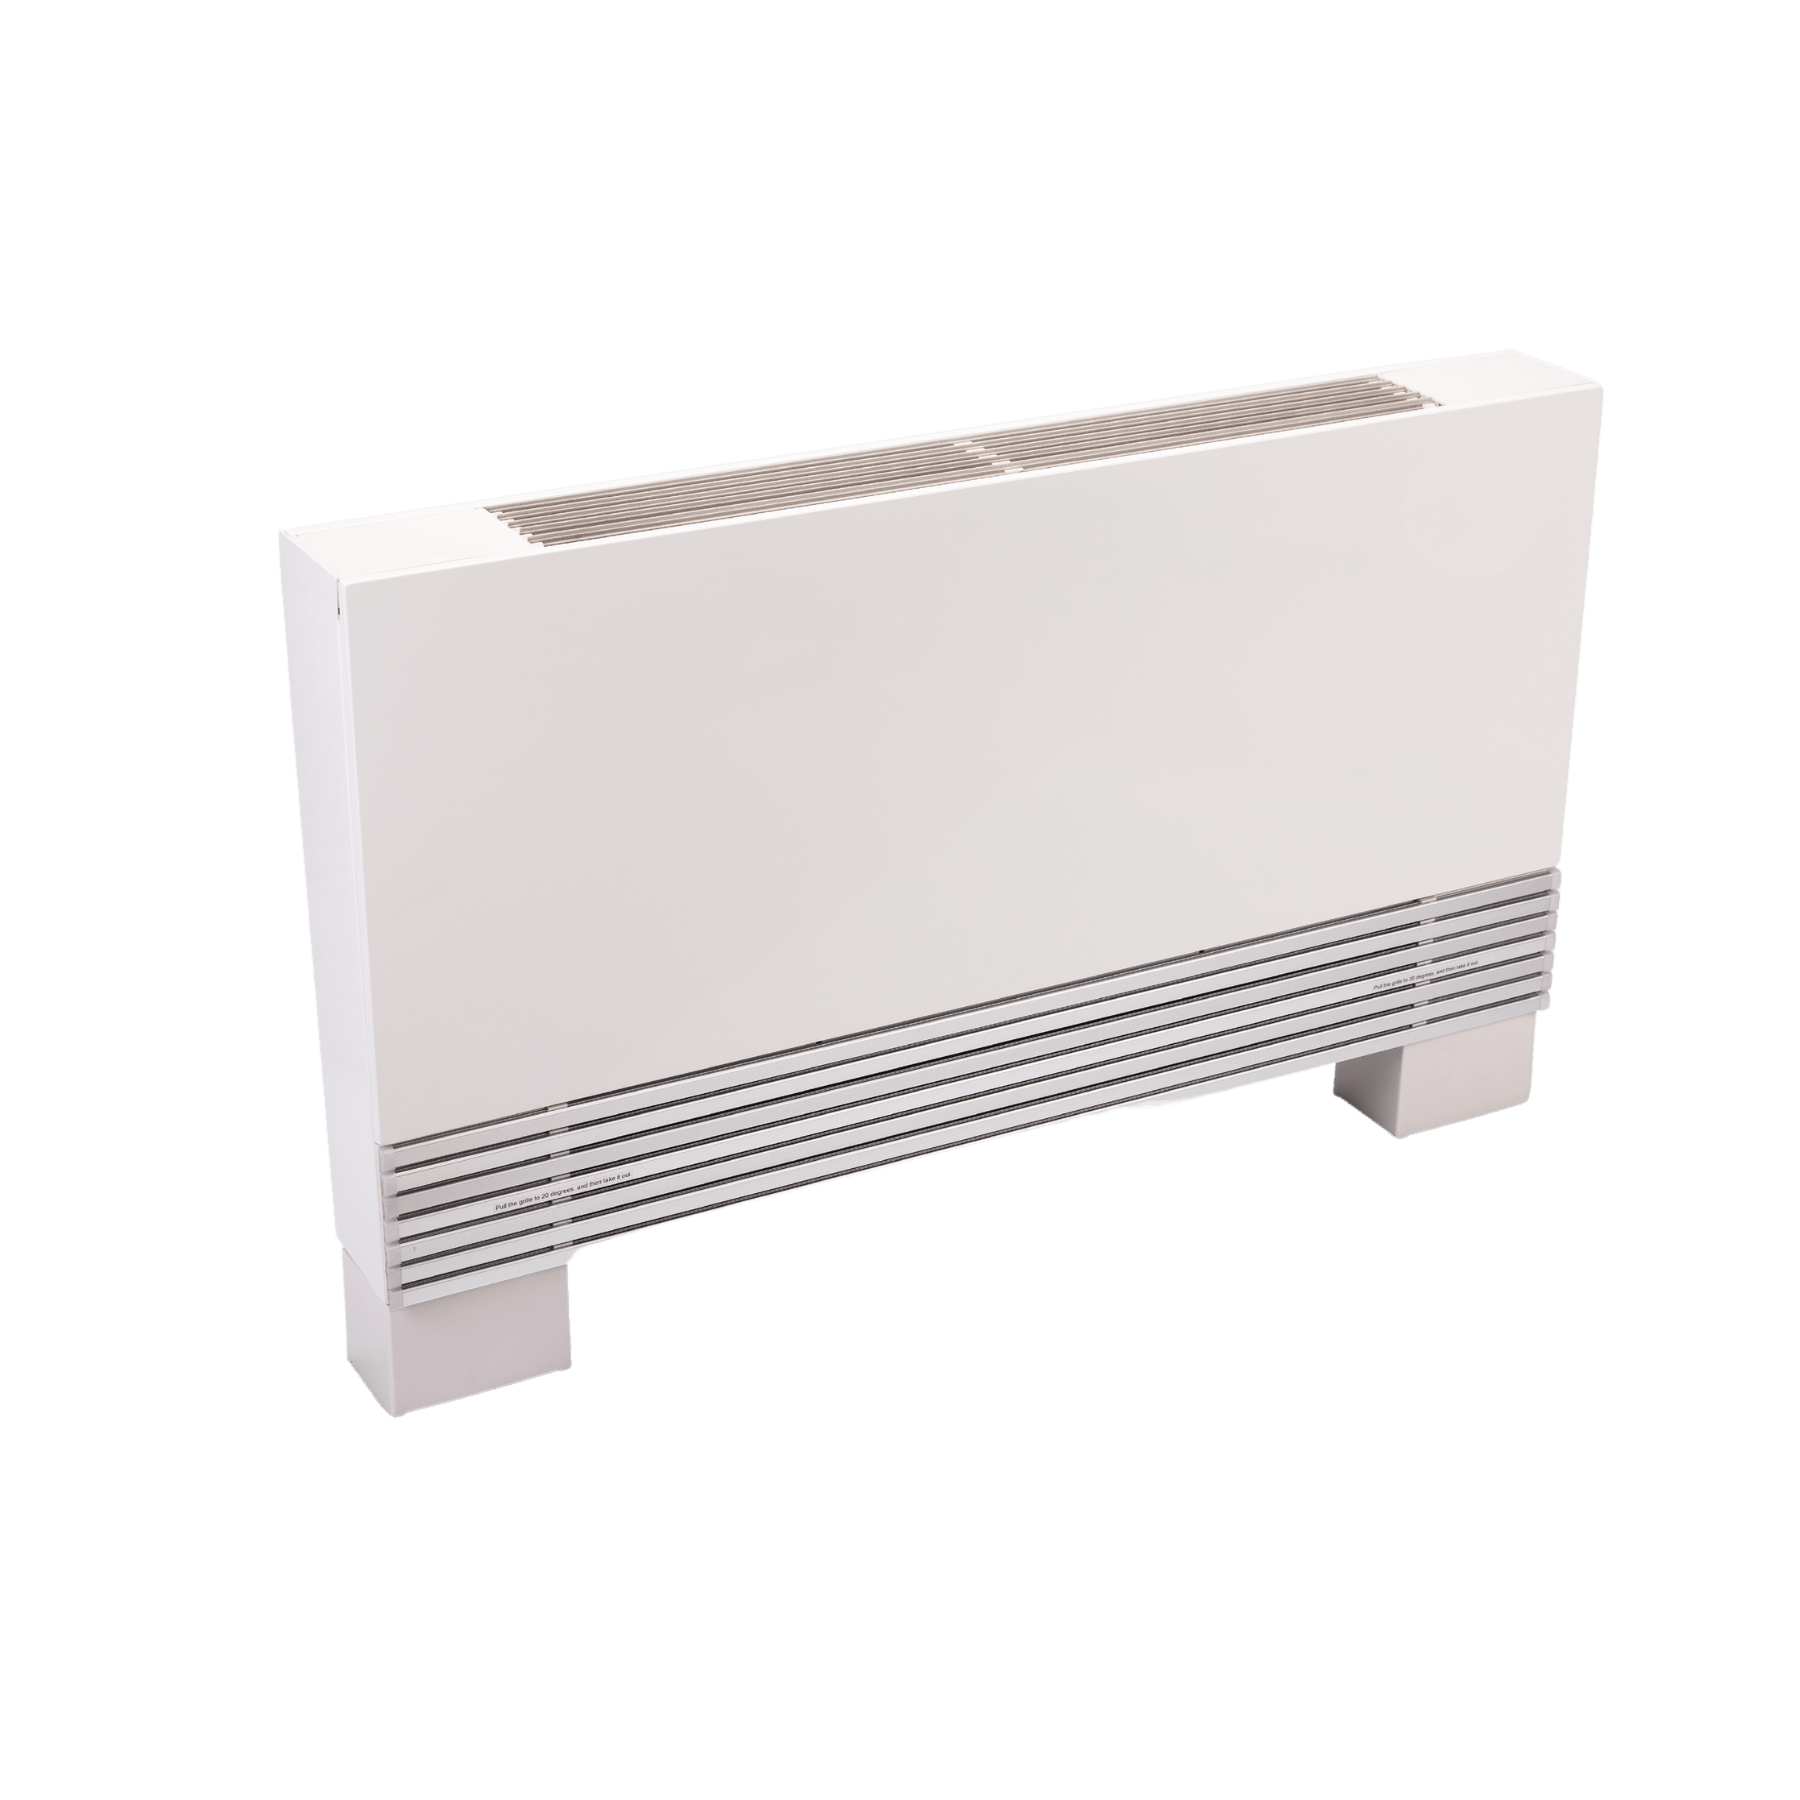 Hydronic Ultra Thin Fan Coil Unit, PFP-050, 2 Pipe System, 120/230V - Capacity 1/2 Ton (Coming Soon)